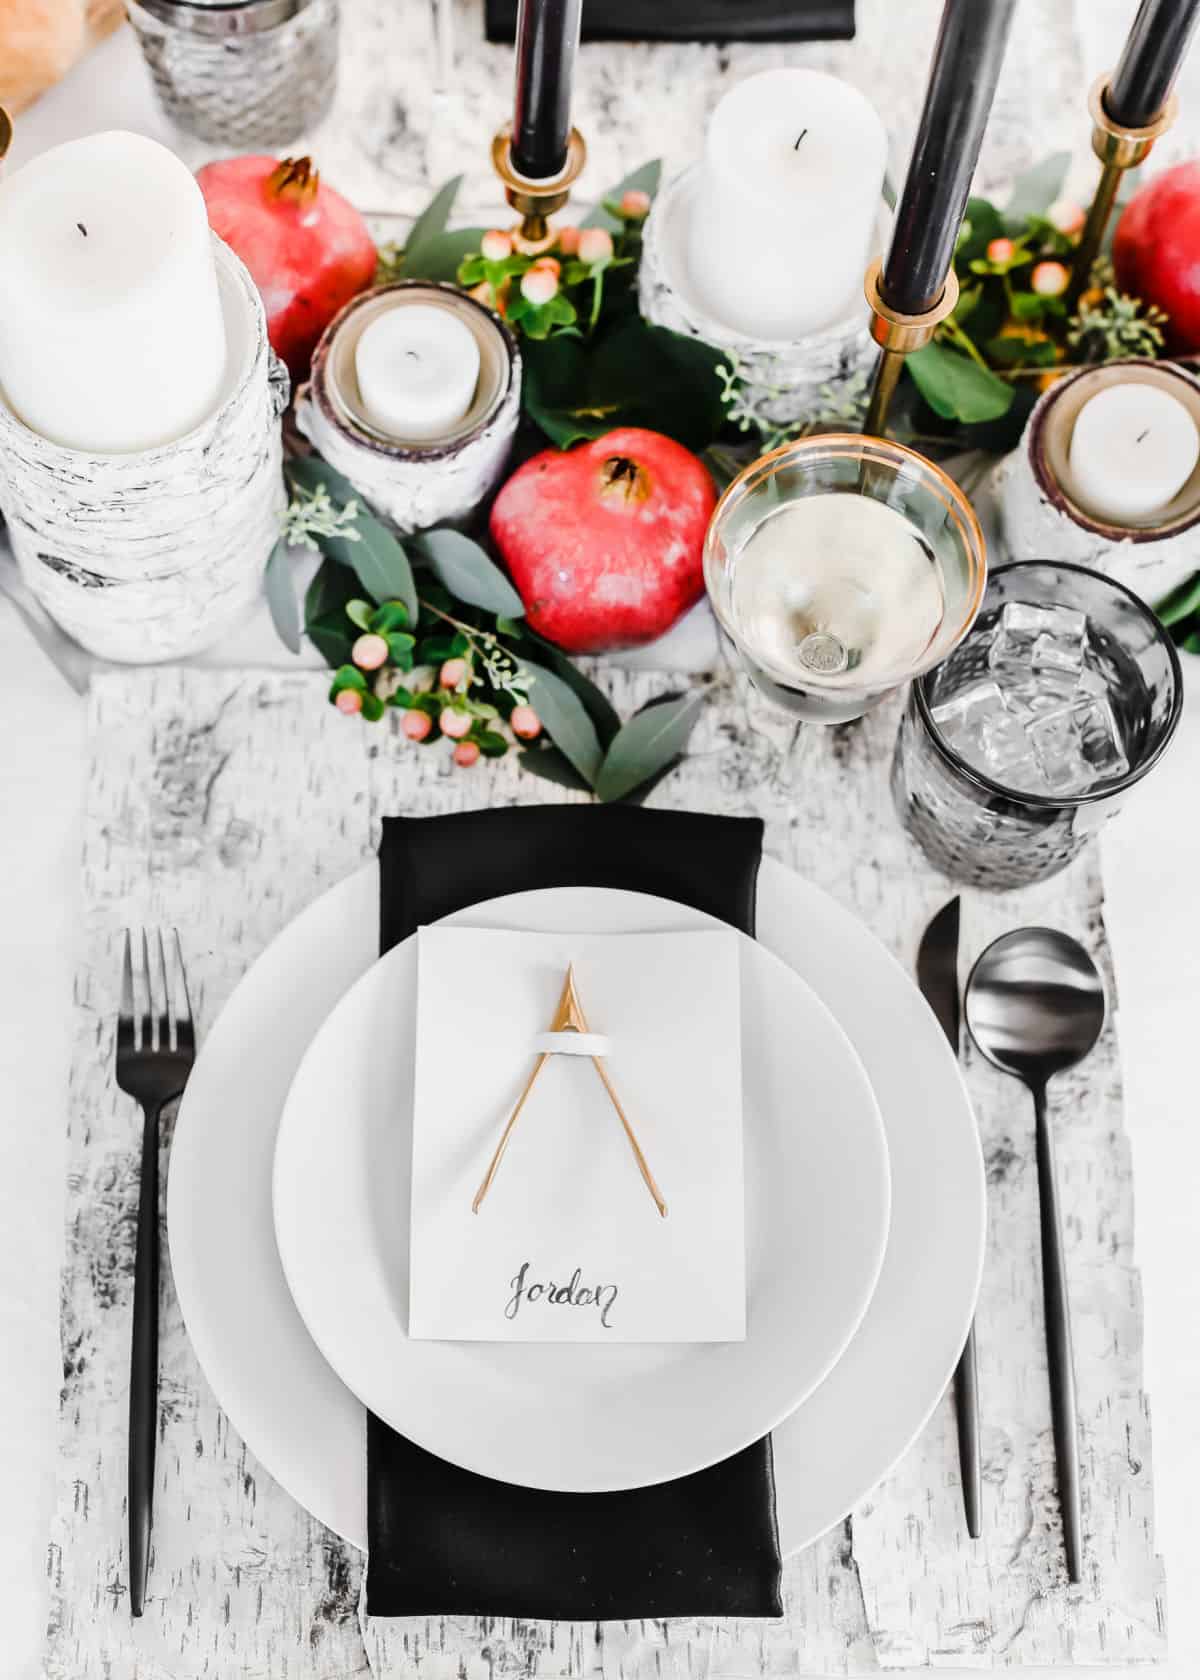 black and white place setting for Thanksgiving with fruit and greenery centerpiece.